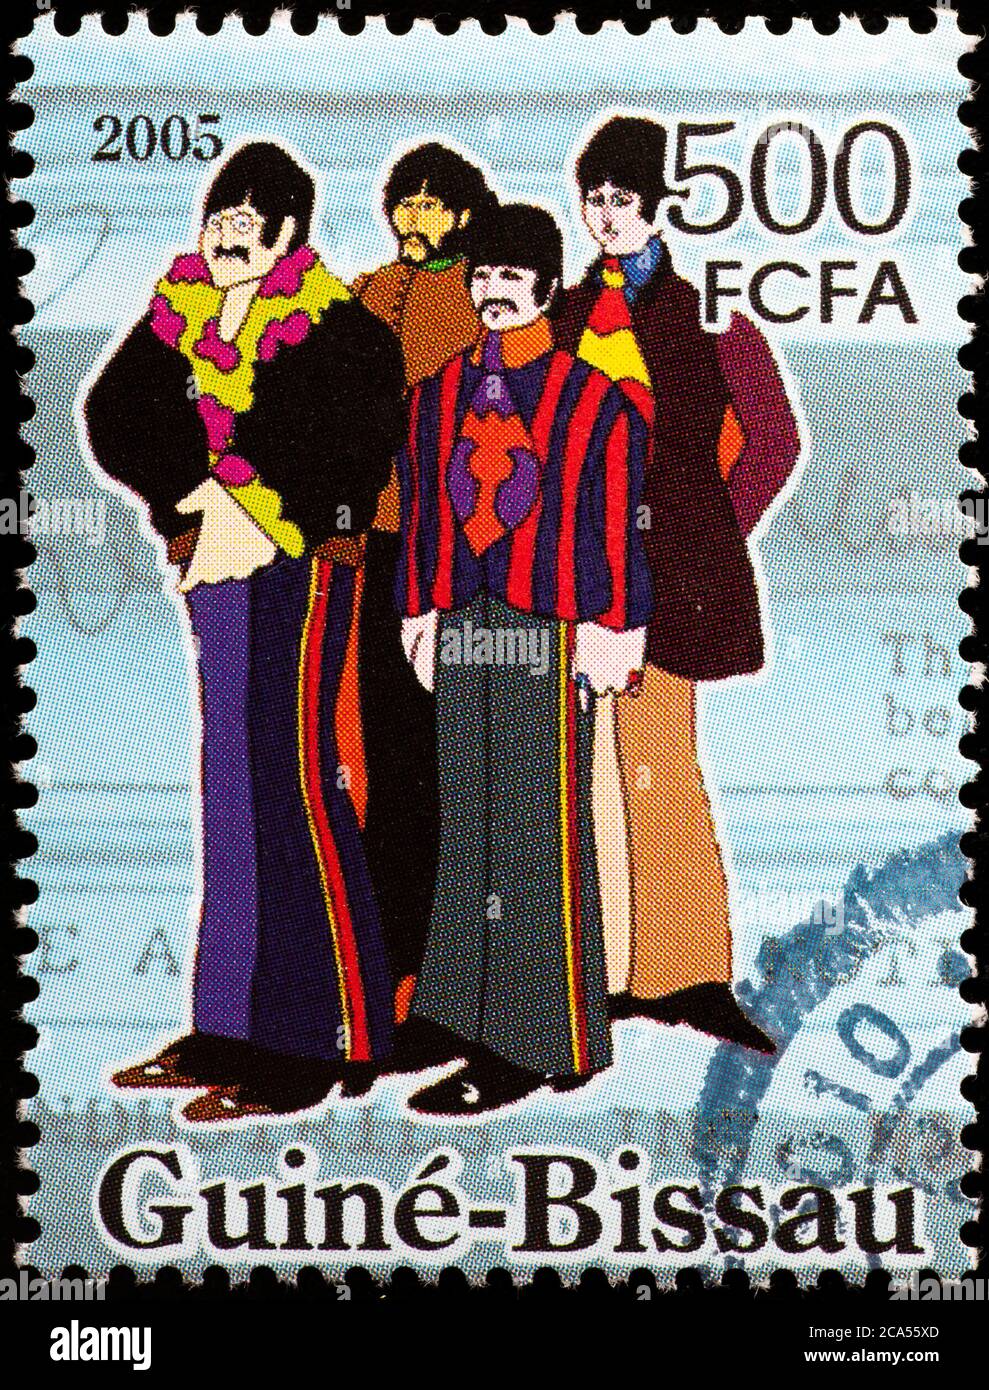 The Beatles as cartoons on postage stamp Stock Photo